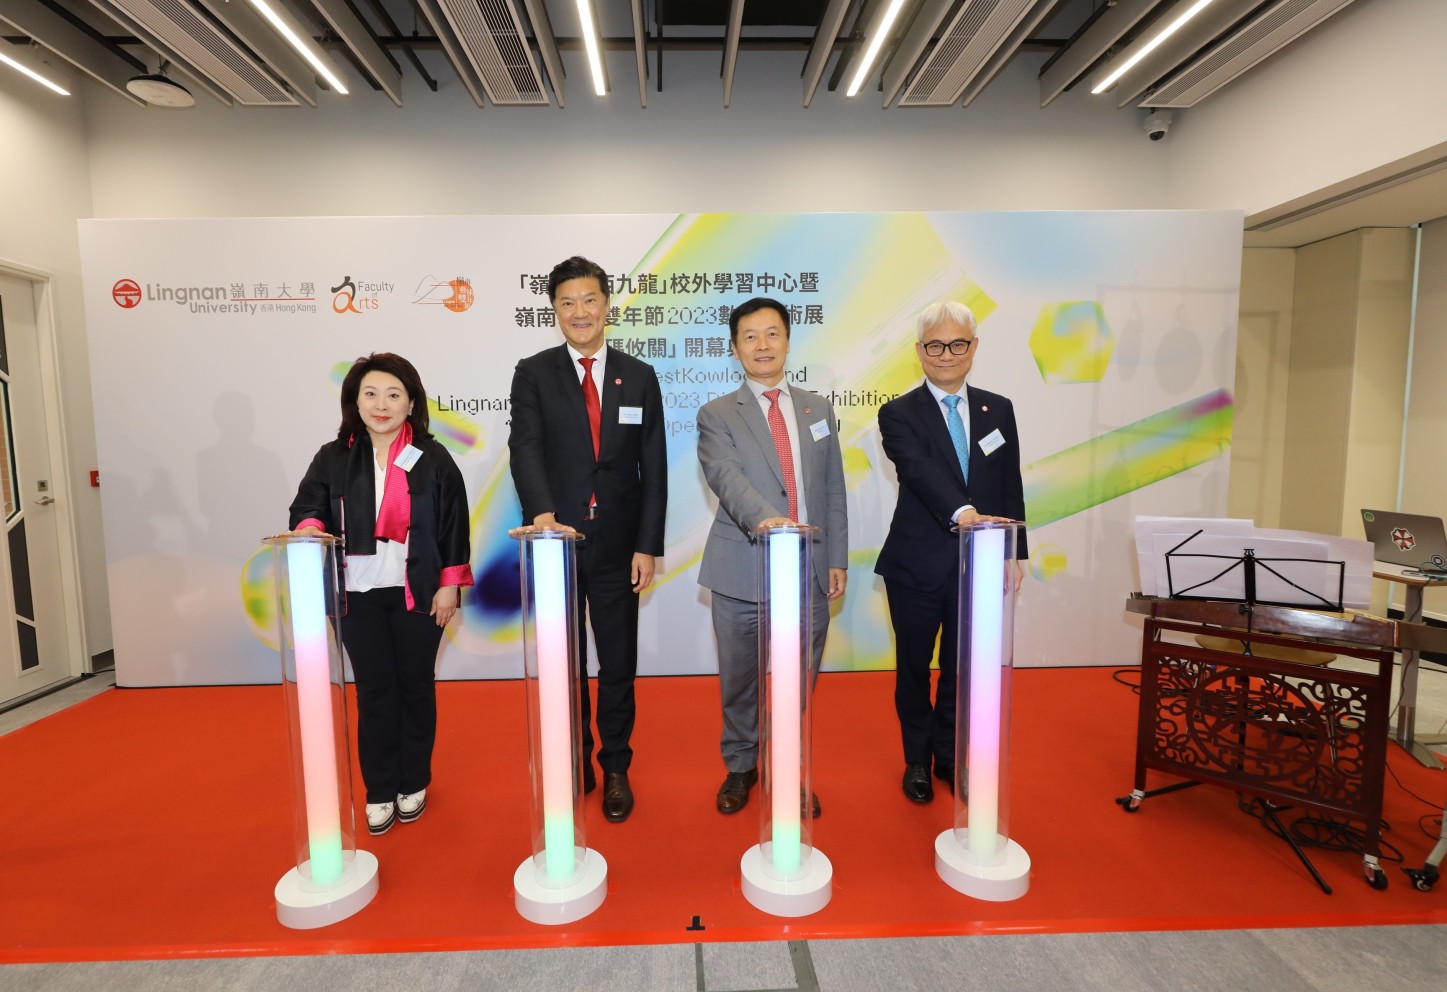 Lingnan University holds its opening ceremony for Lingnan@WestKowloon off-campus learning hub cum Lingnan Arts Biennale.  From left: Council Treasurer Ms Katherine Cheung Marn-kay, Council Chairman Mr Andrew Yao Cho-fai, Prof S. Joe Qin, President and Wai Kee Kau Chair Professor of Data Science of Lingnan University, and Chairman of the Court Dr Patrick Wong Chi-kwong.  